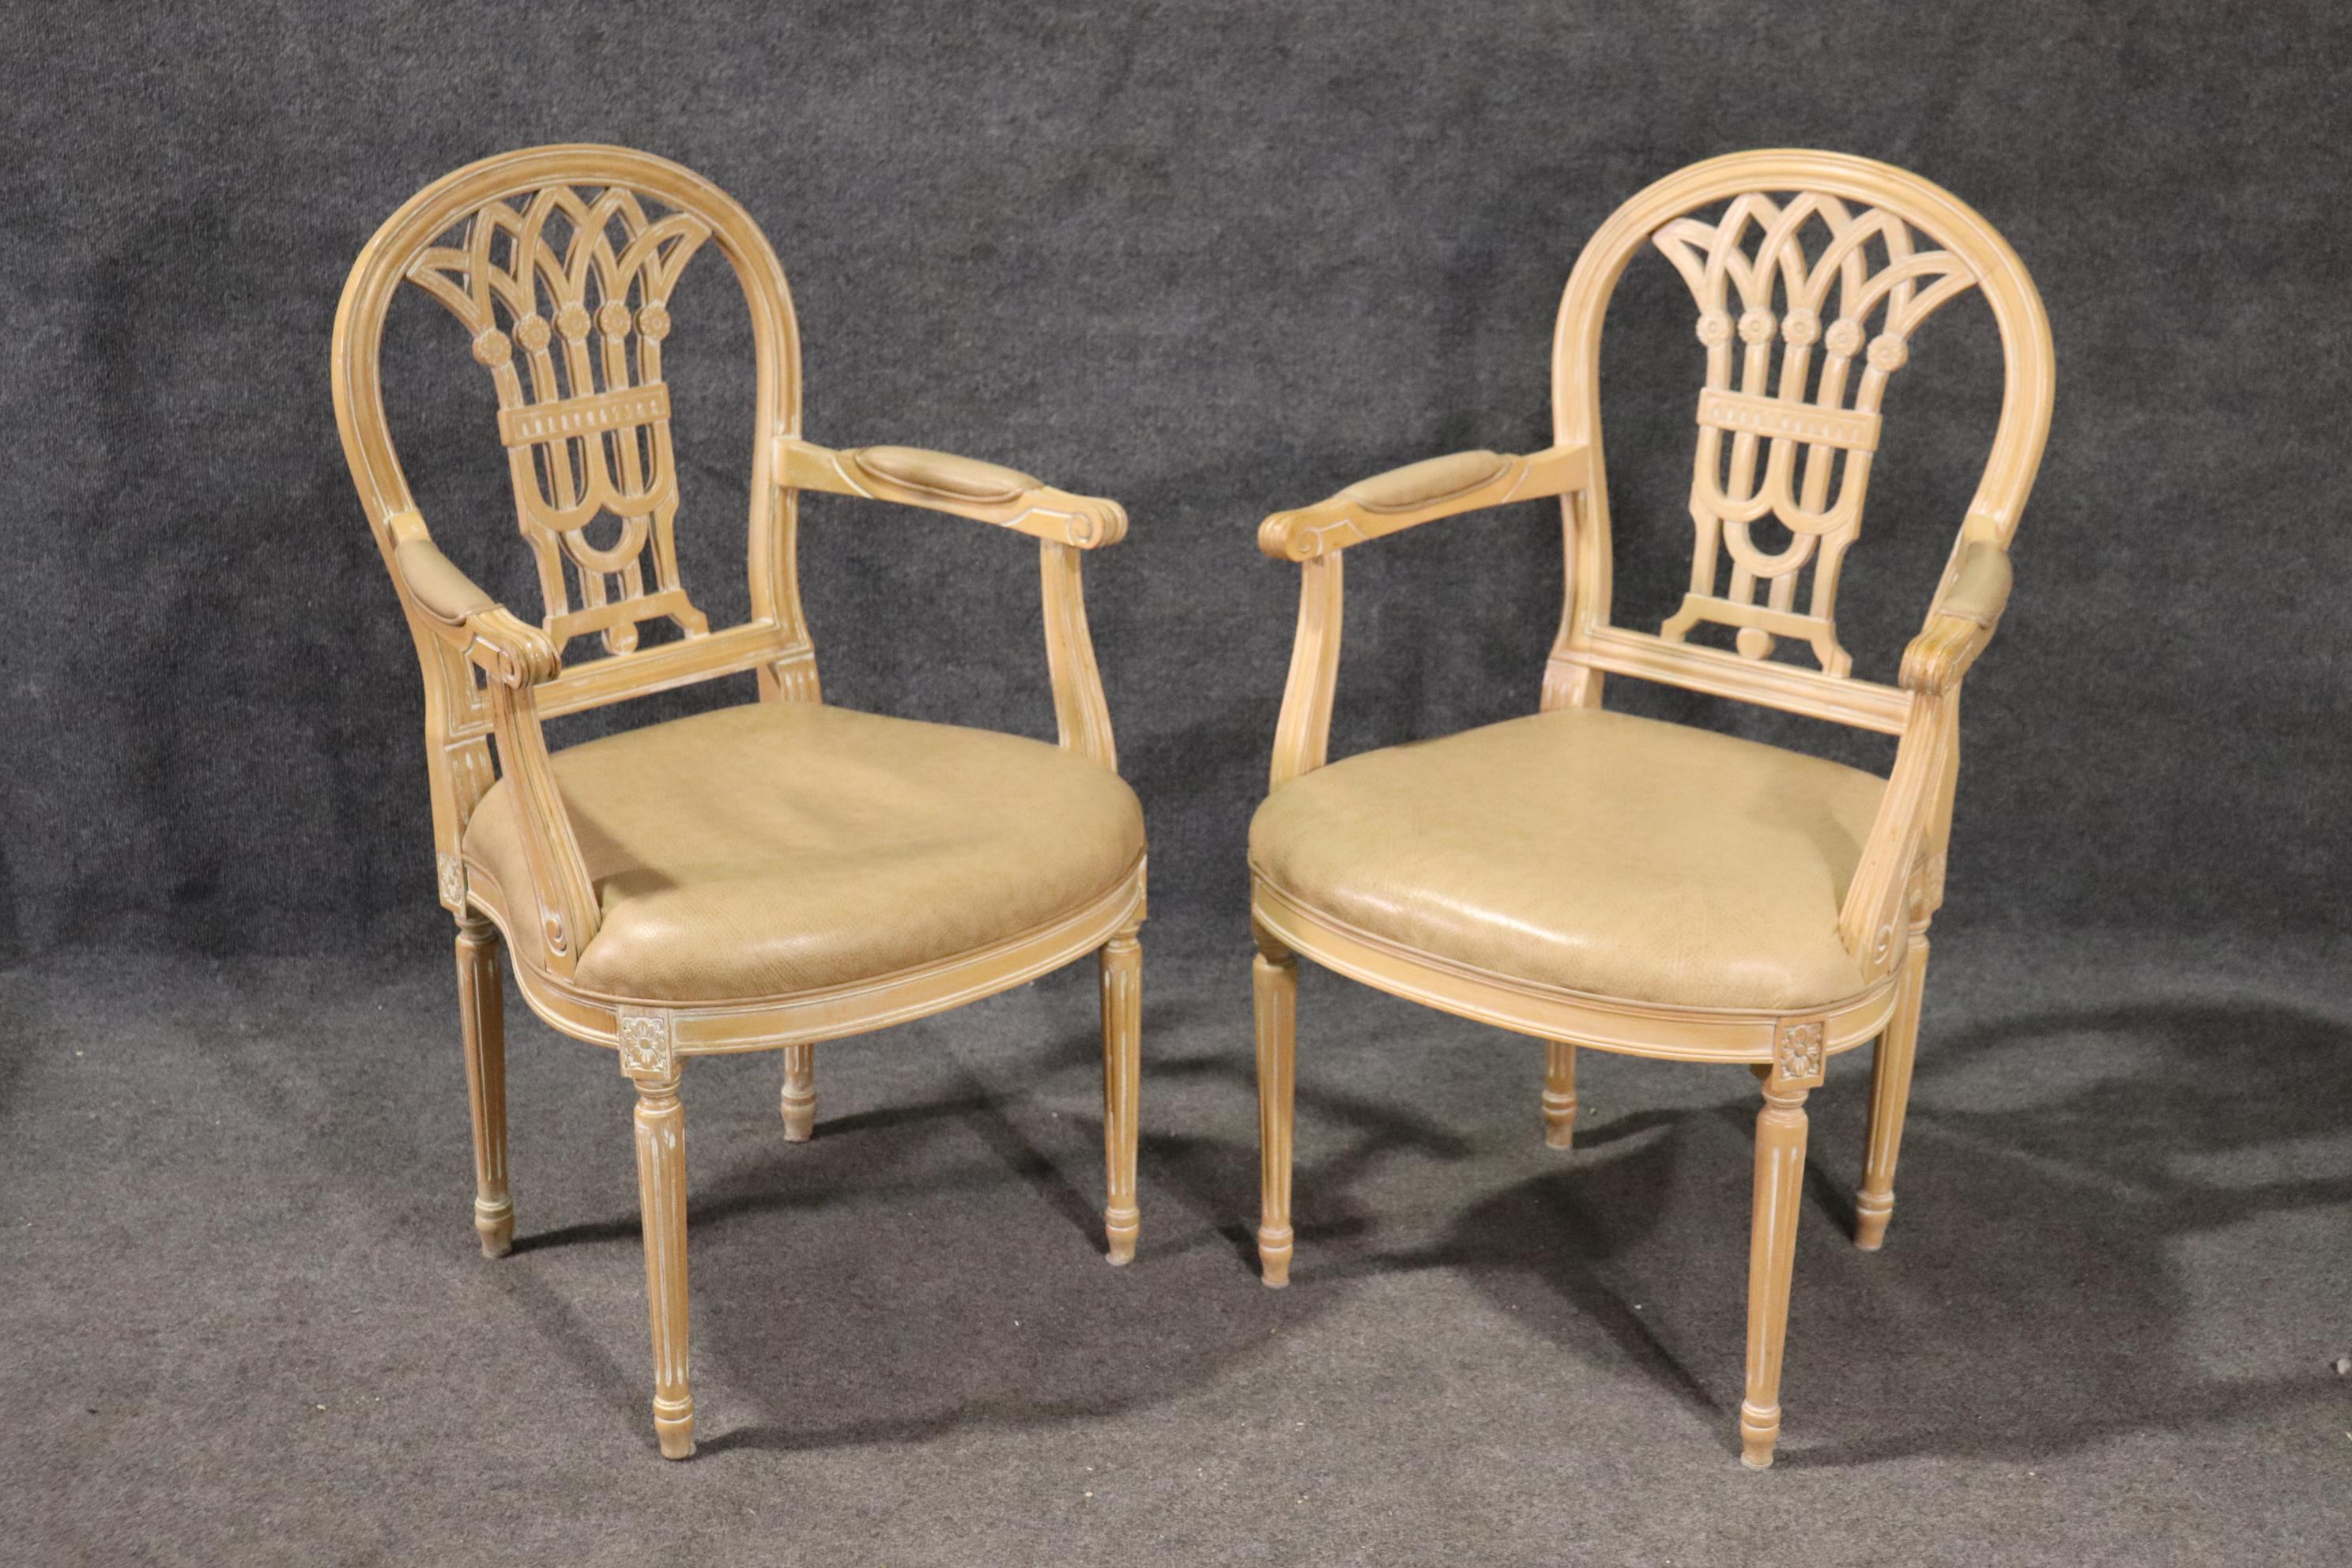 This is a beautiful set of Louis XVI style chairs. They are in good condition. The chairs measure 40 tall x 25 wide x 24 deep and the seat height is 19 inches.